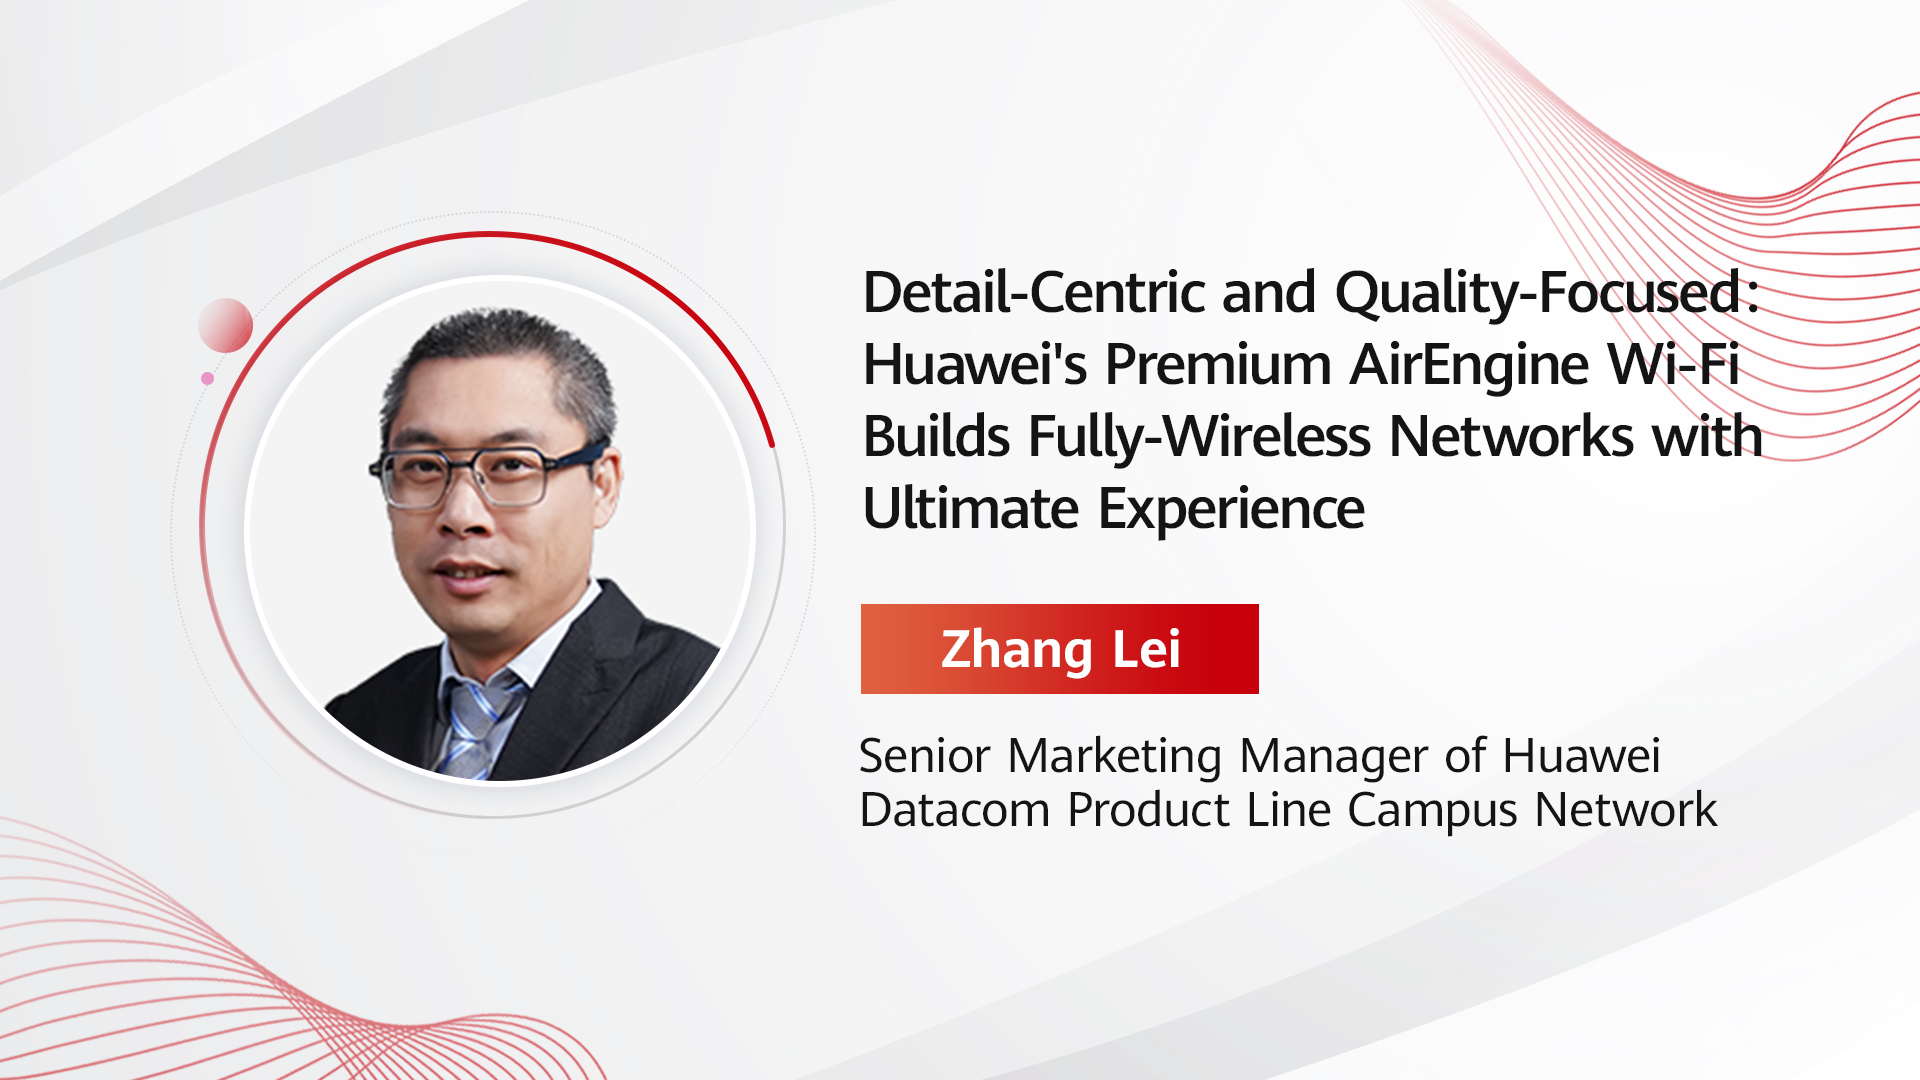 Detail-Centric and Quality-Focused: Huawei's Premium AirEngine Wi-Fi Builds Fully-Wireless Networks with Ultimate Experience